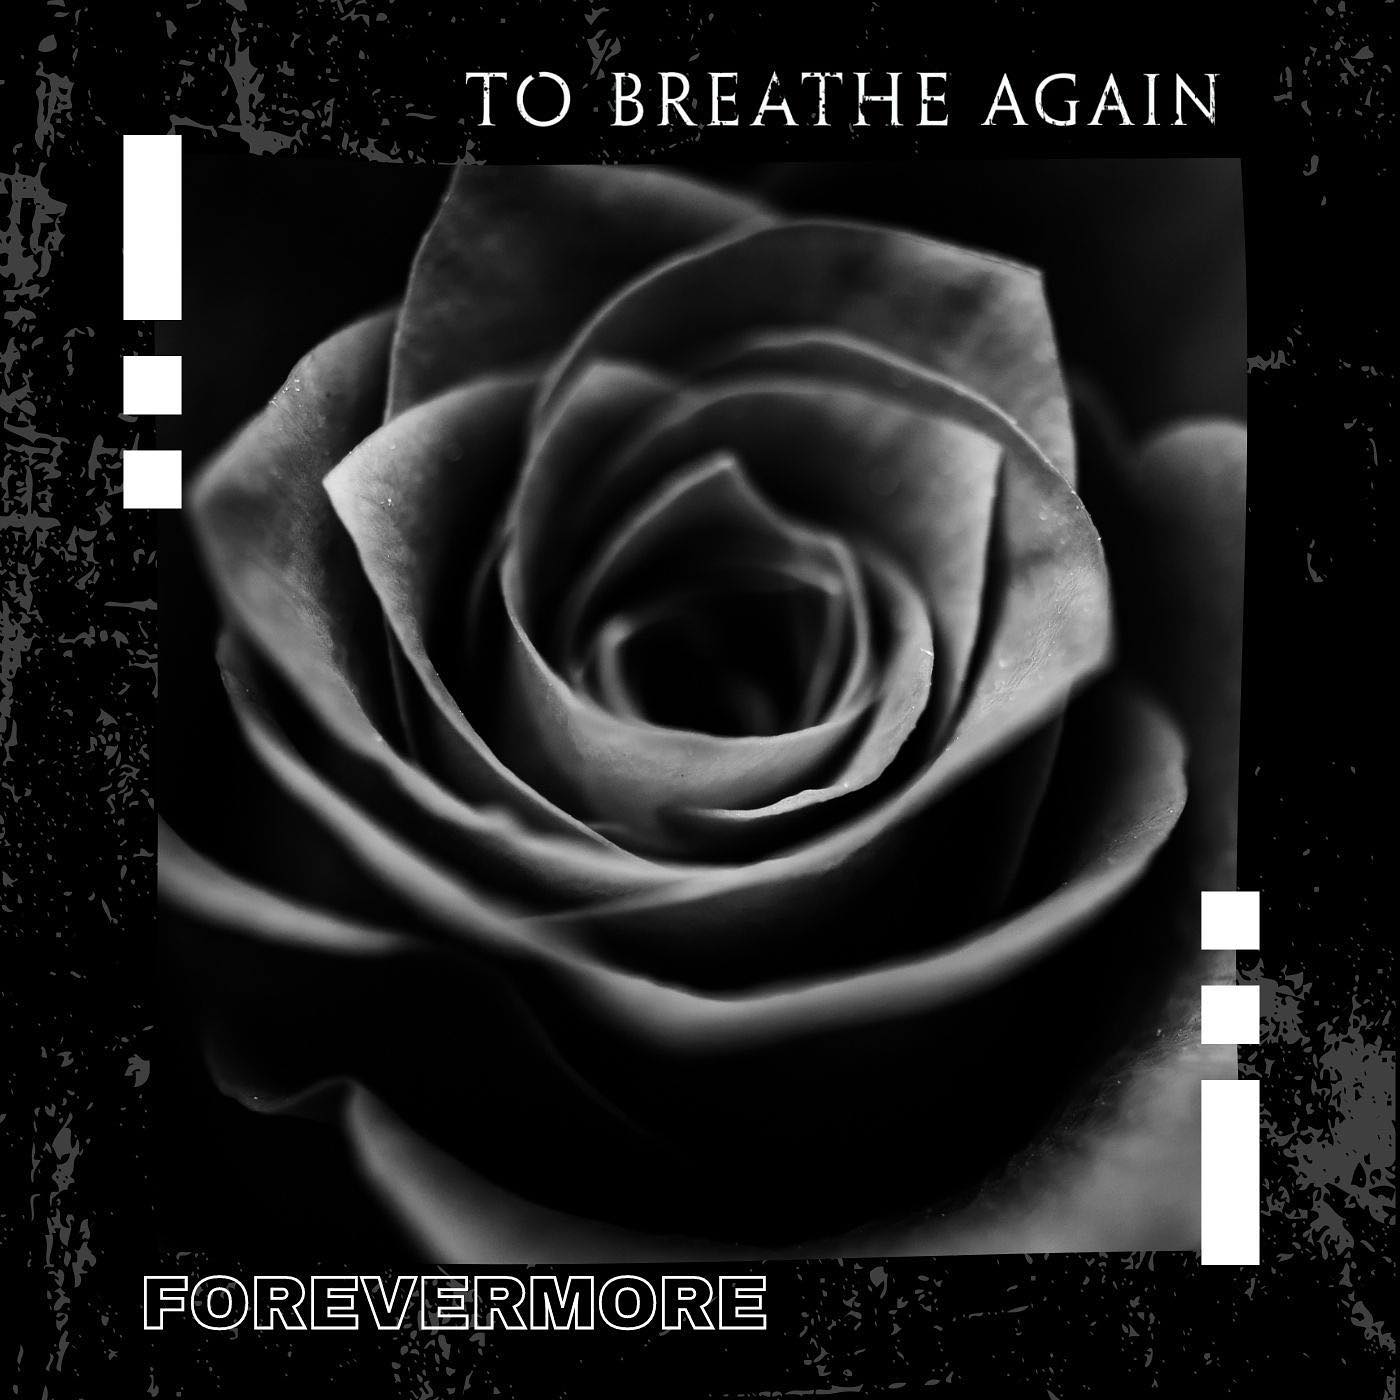 Episode 34: To Breathe Again stops by the Green Room.